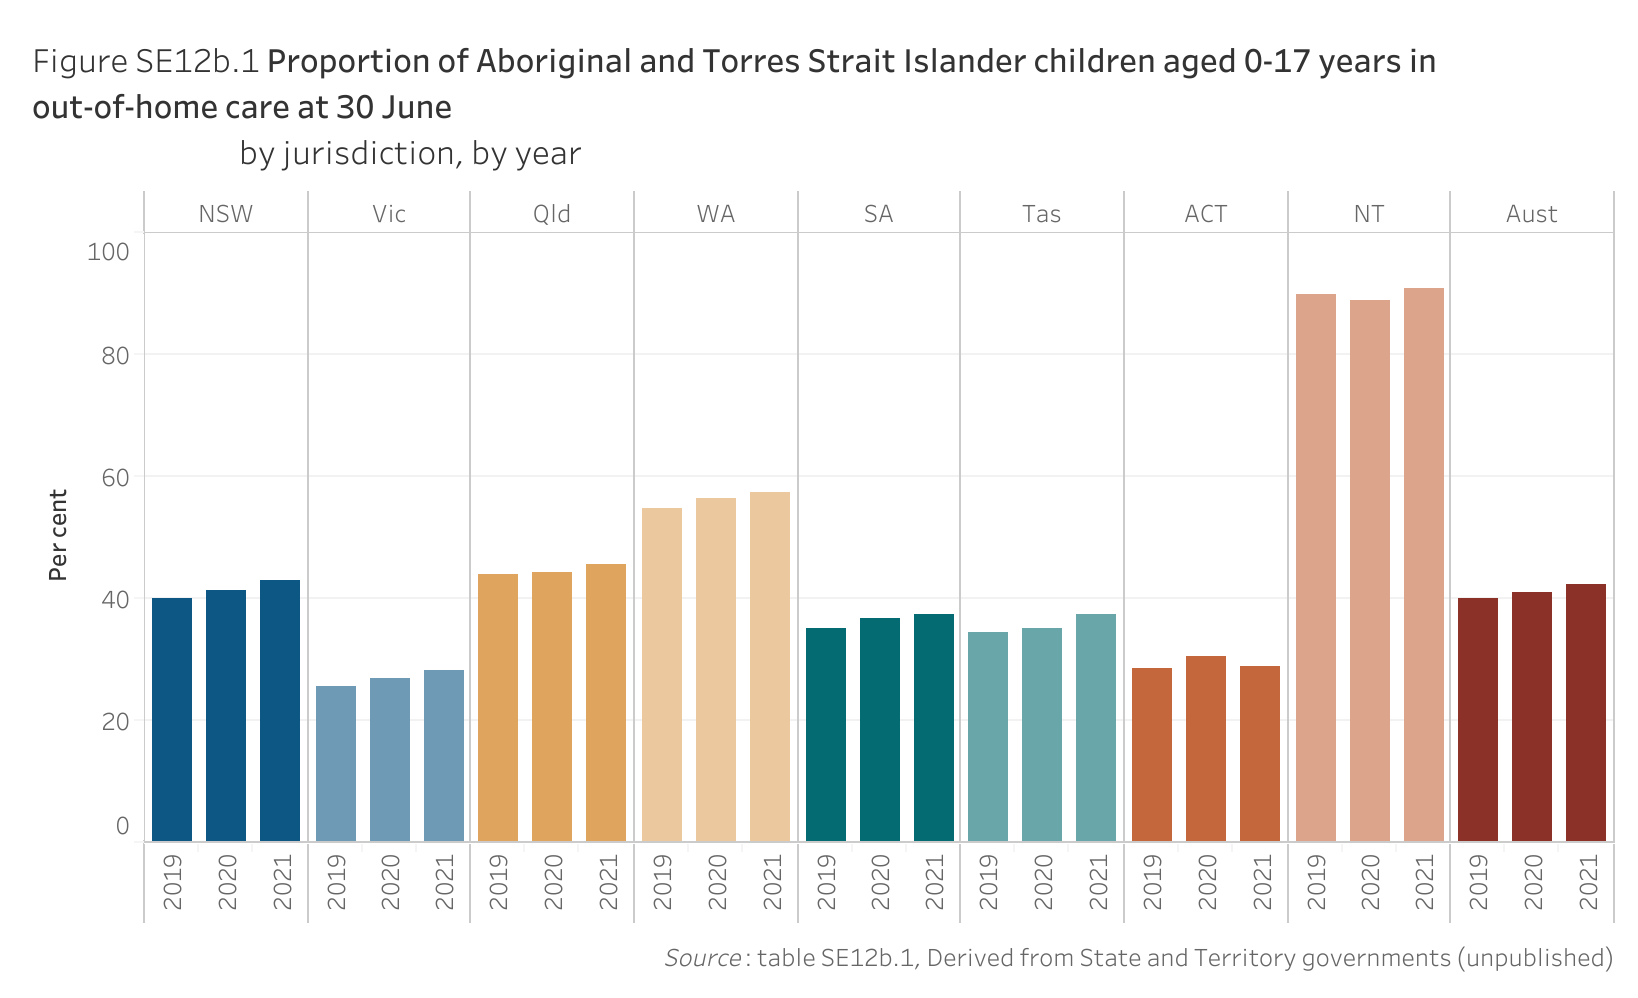 Figure SE12b.1. Bar chart showing the proportion children aged 0-17 years in out-of-home care at 30 June who were Aboriginal and Torres Strait Islander children, by jurisdiction and by year. Data table of figure SE12b.1 is below.